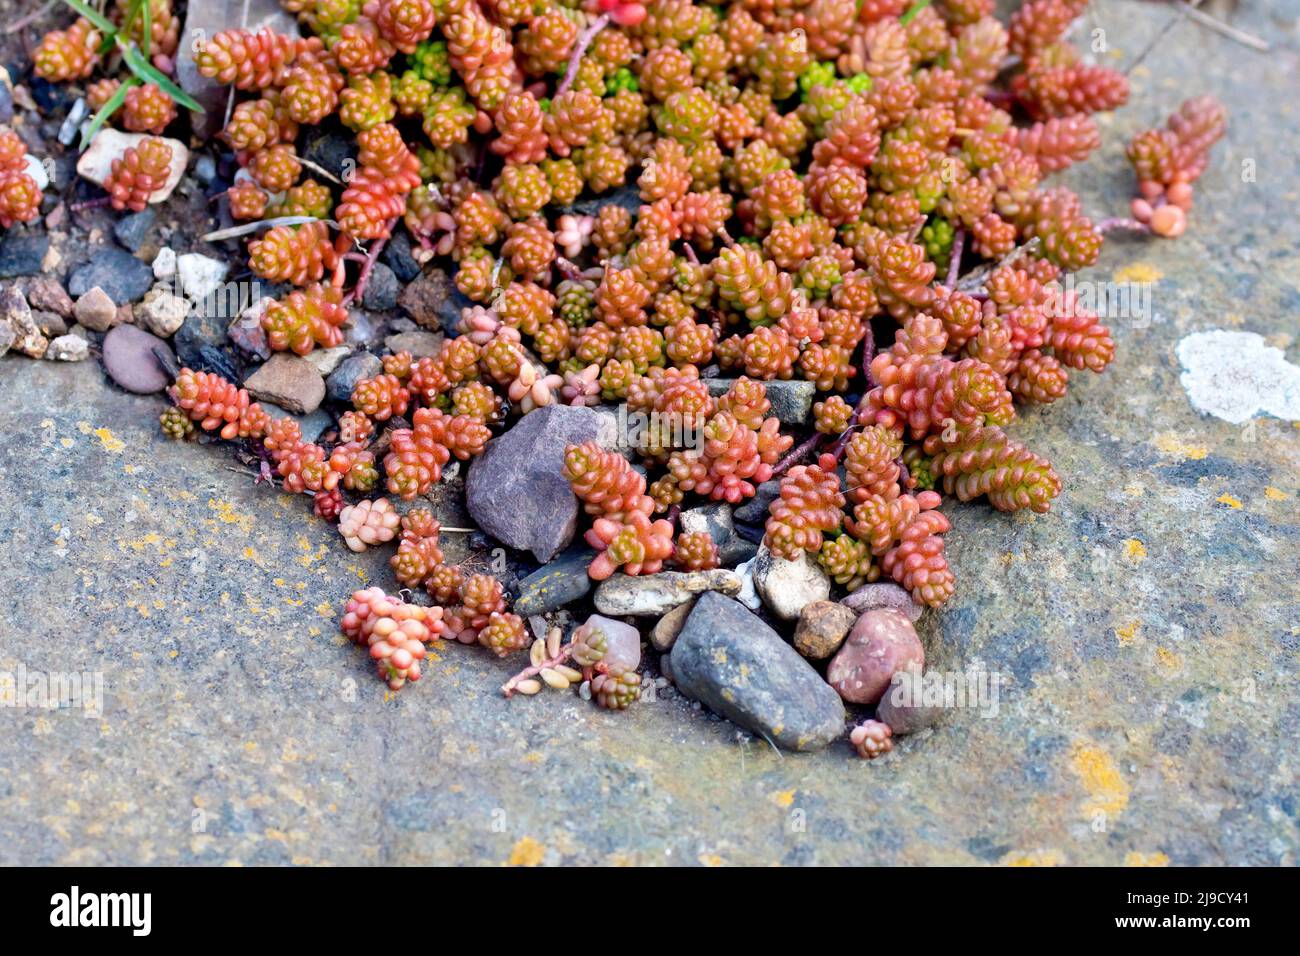 Biting Stonecrop or Wall Pepper (sedum acre), close up showing the succulent leaves and stems of the plant spreading across the surface of a boulder. Stock Photo